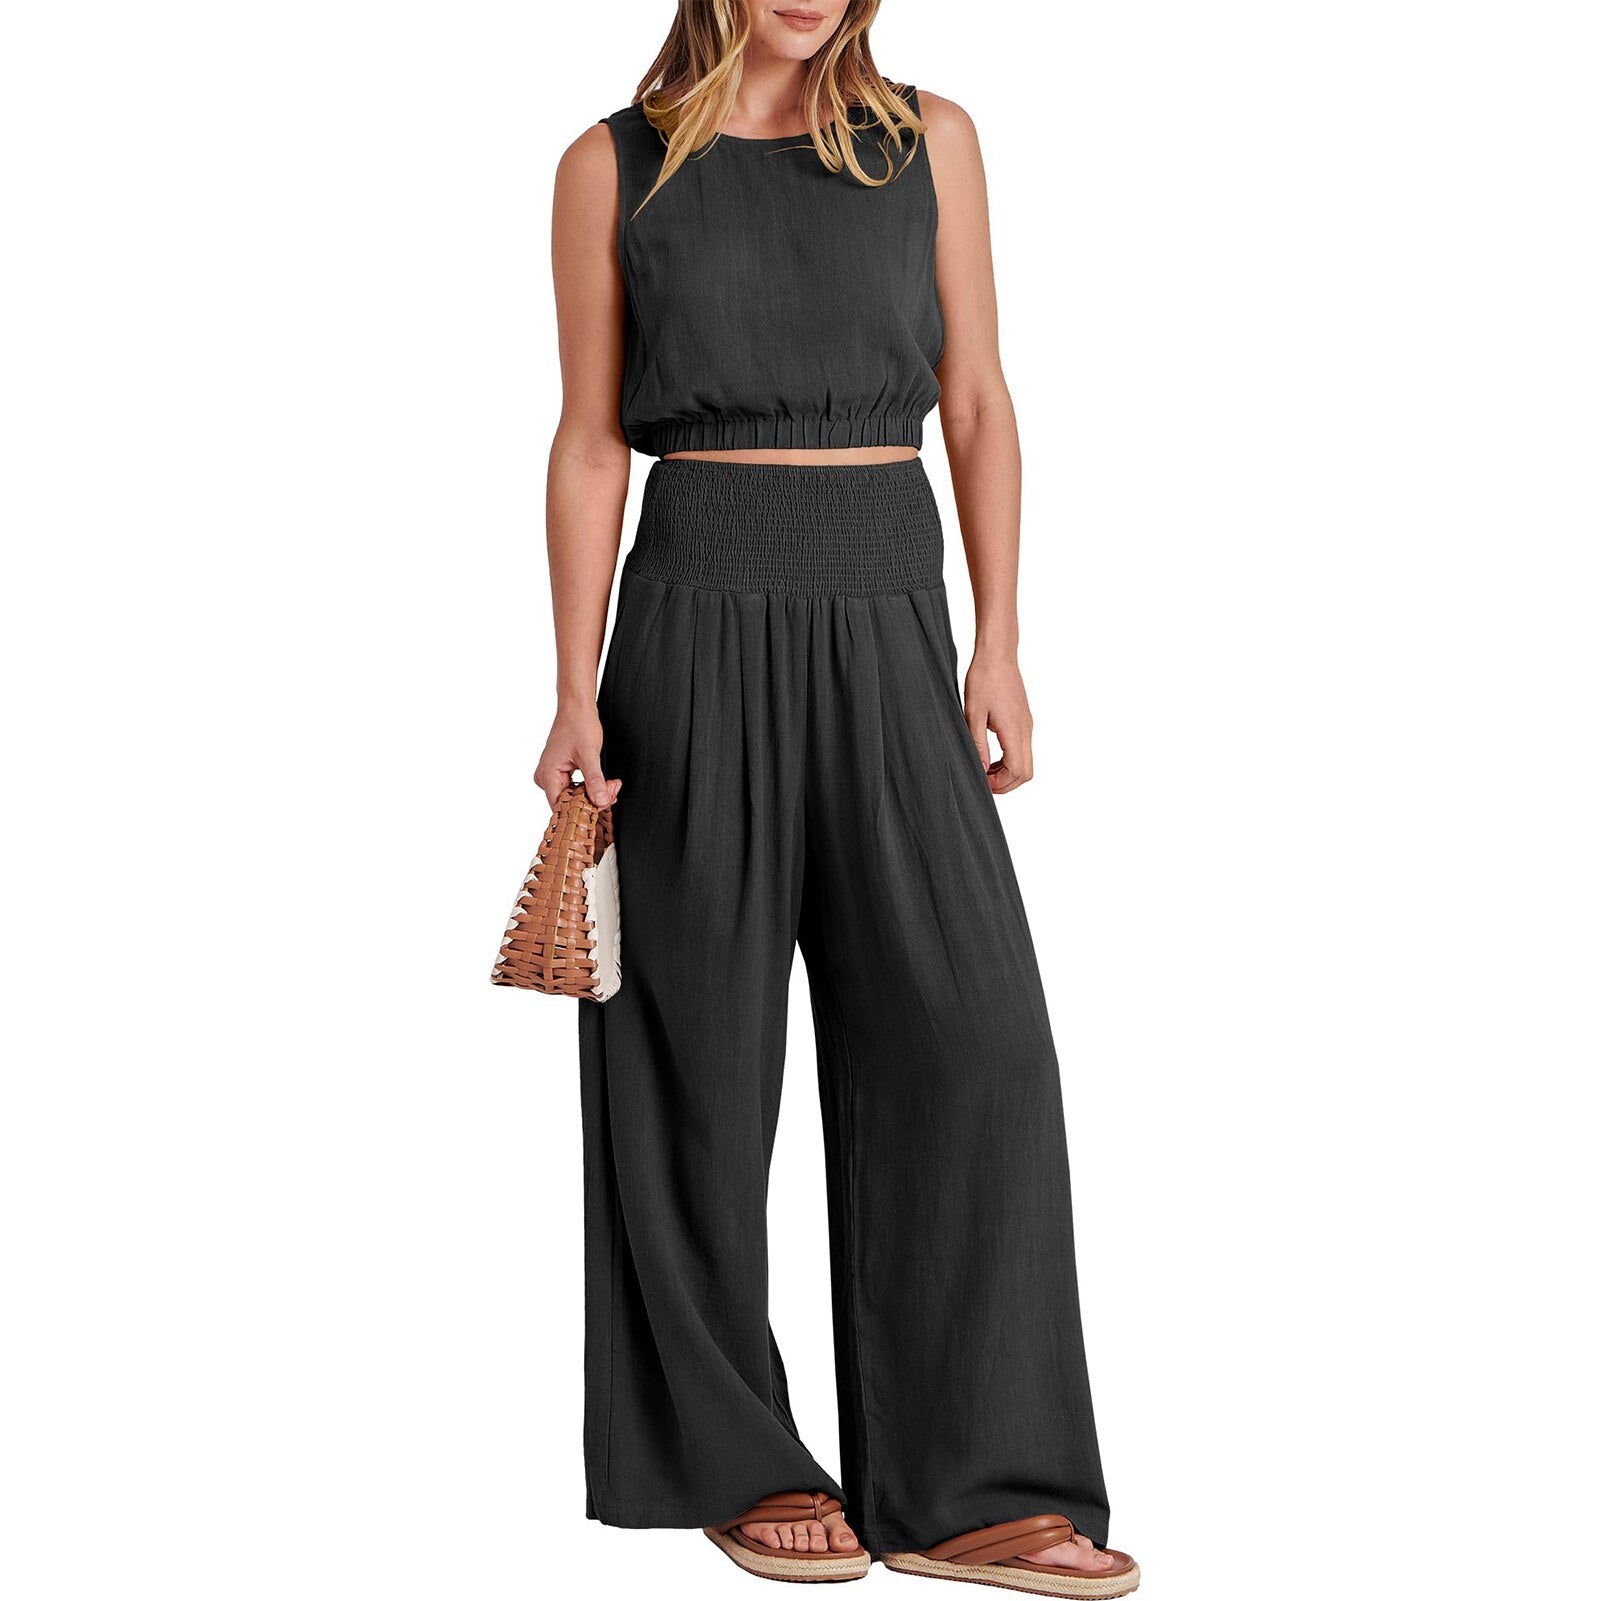 Back to School Wide Leg Women Casual 2 Piece Outfit Ladies Crew Neck Top Smocked Pants High Waisted Boho Style Sleeveless Daily Outfit